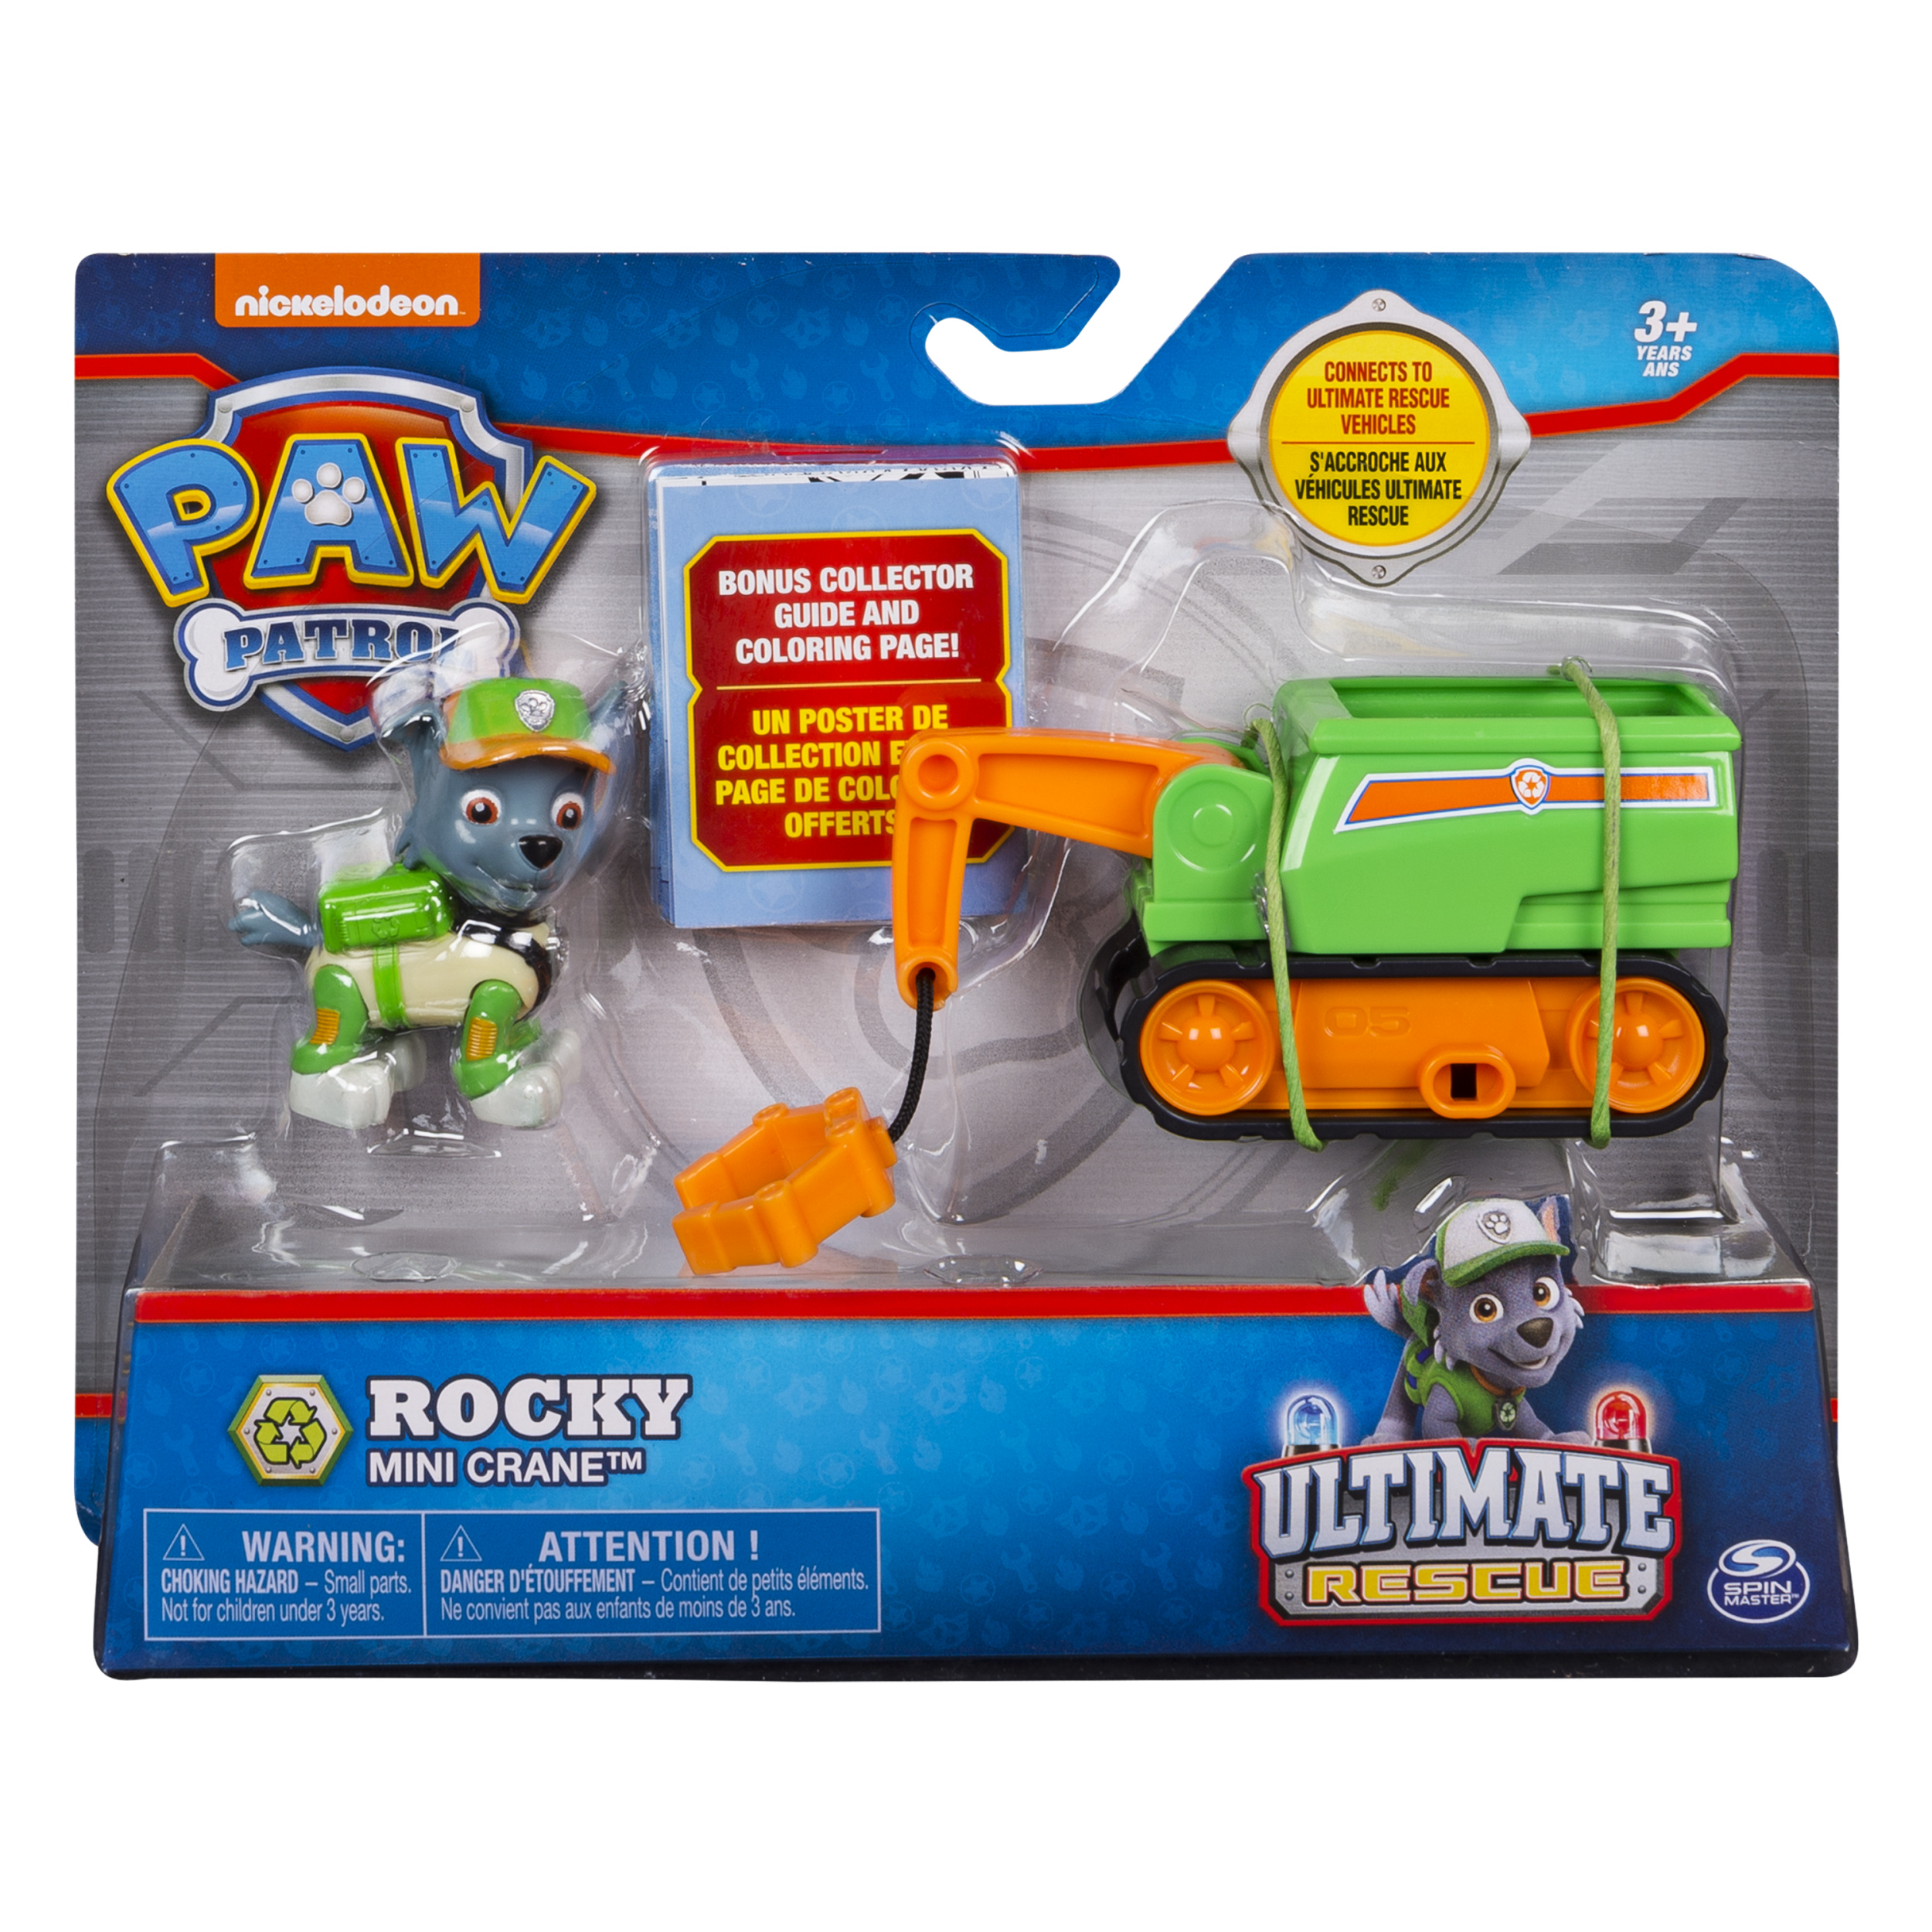 PAW Patrol Ultimate Rescue, Rocky’s Mini Crane Cart with Collectible Figure for Ages 3 and Up - image 2 of 6